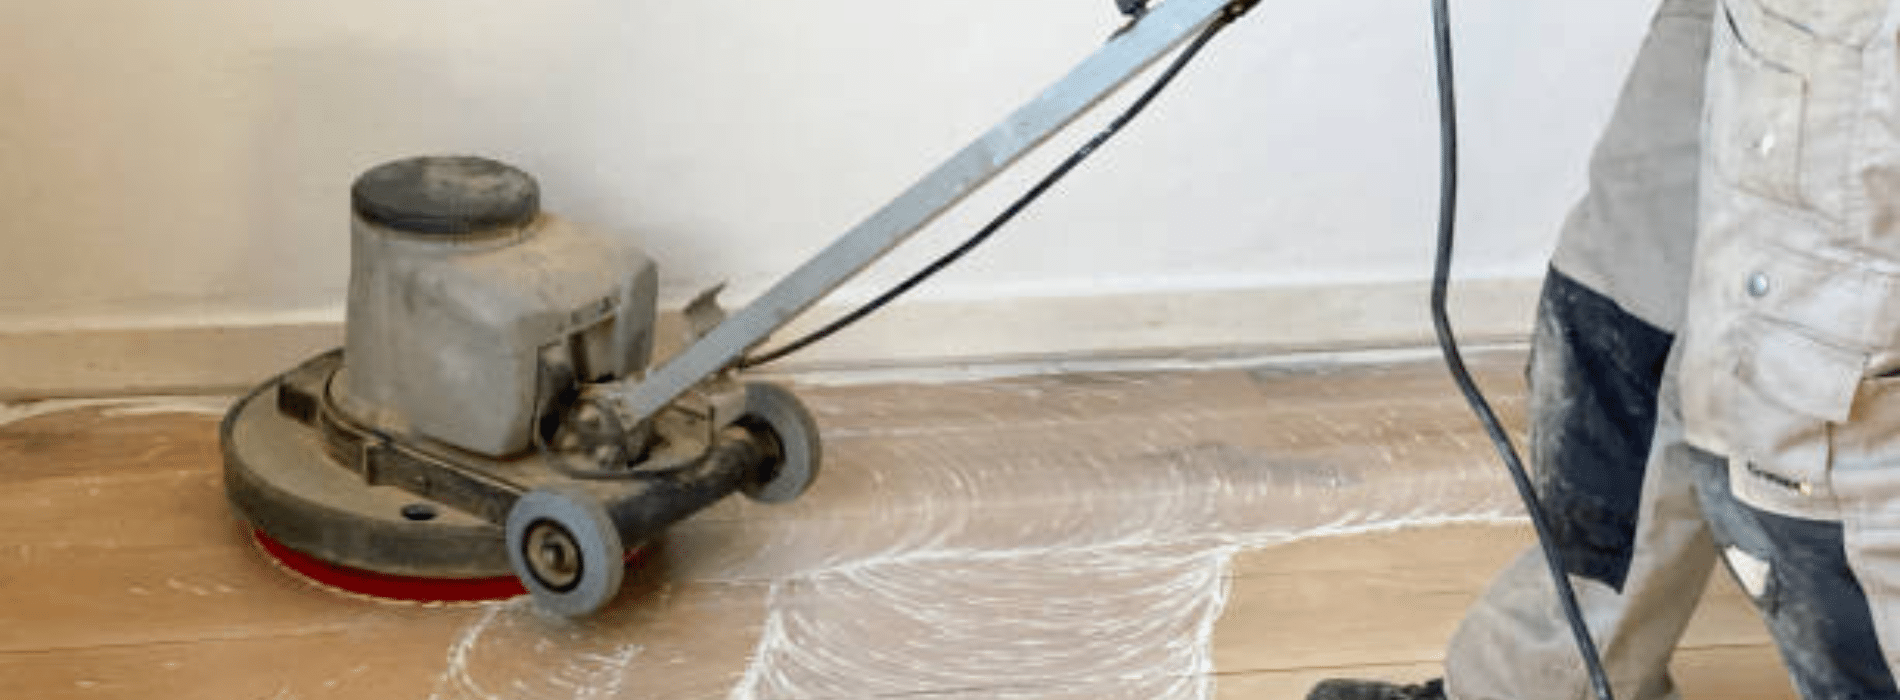 In Manor Park, E12, Mr Sander® utilizing the high-performance Effect 2200 belt sander for precision. Voltage: 220V, Frequency: 60Hz. Witness the clean and efficient results on a 250x750 mm herringbone floor with the HEPA-filtered dust extraction system.